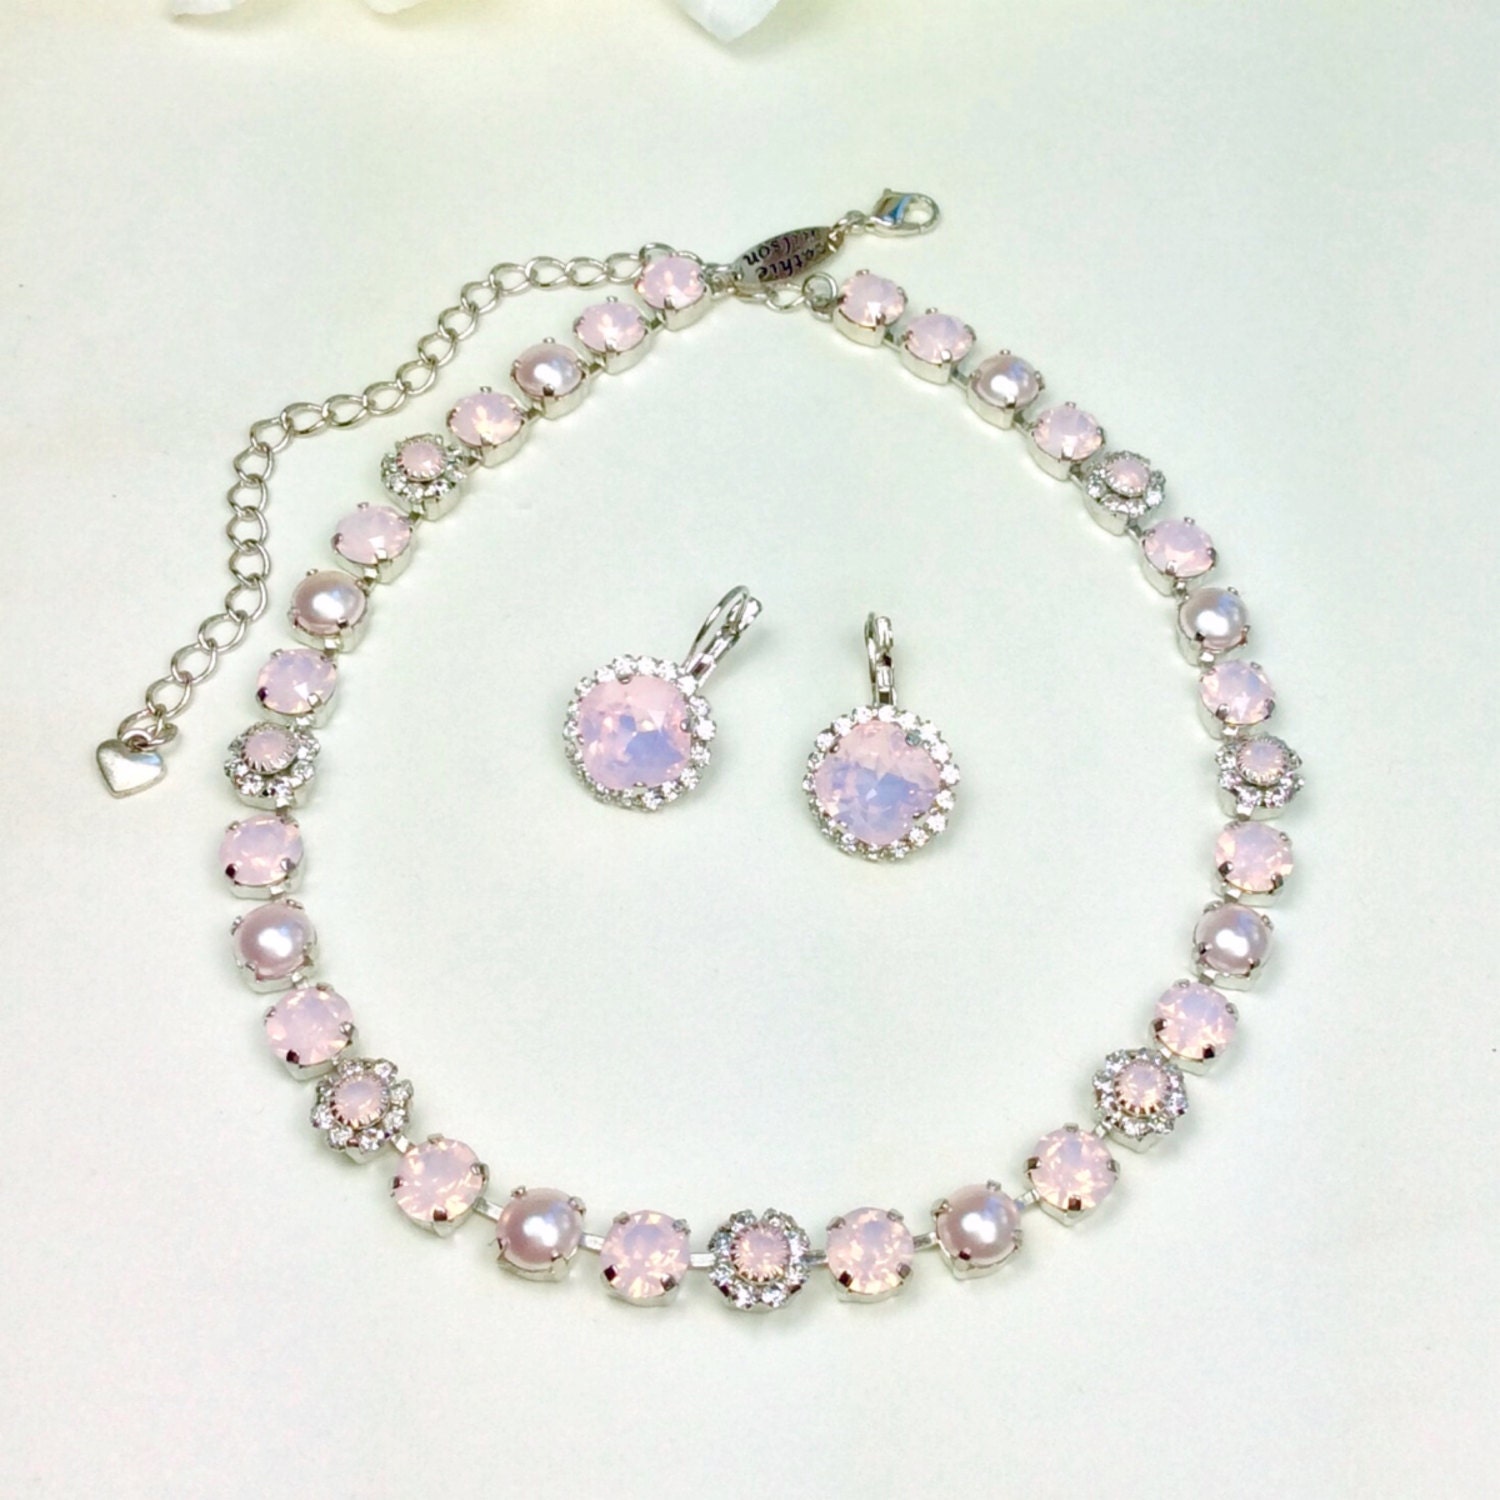 Swarovski Crystal 8.5mm Necklace  - One Of A Kind  - " Pale Pink Petals "  - Feminine Flowers - FREE SHIPPING